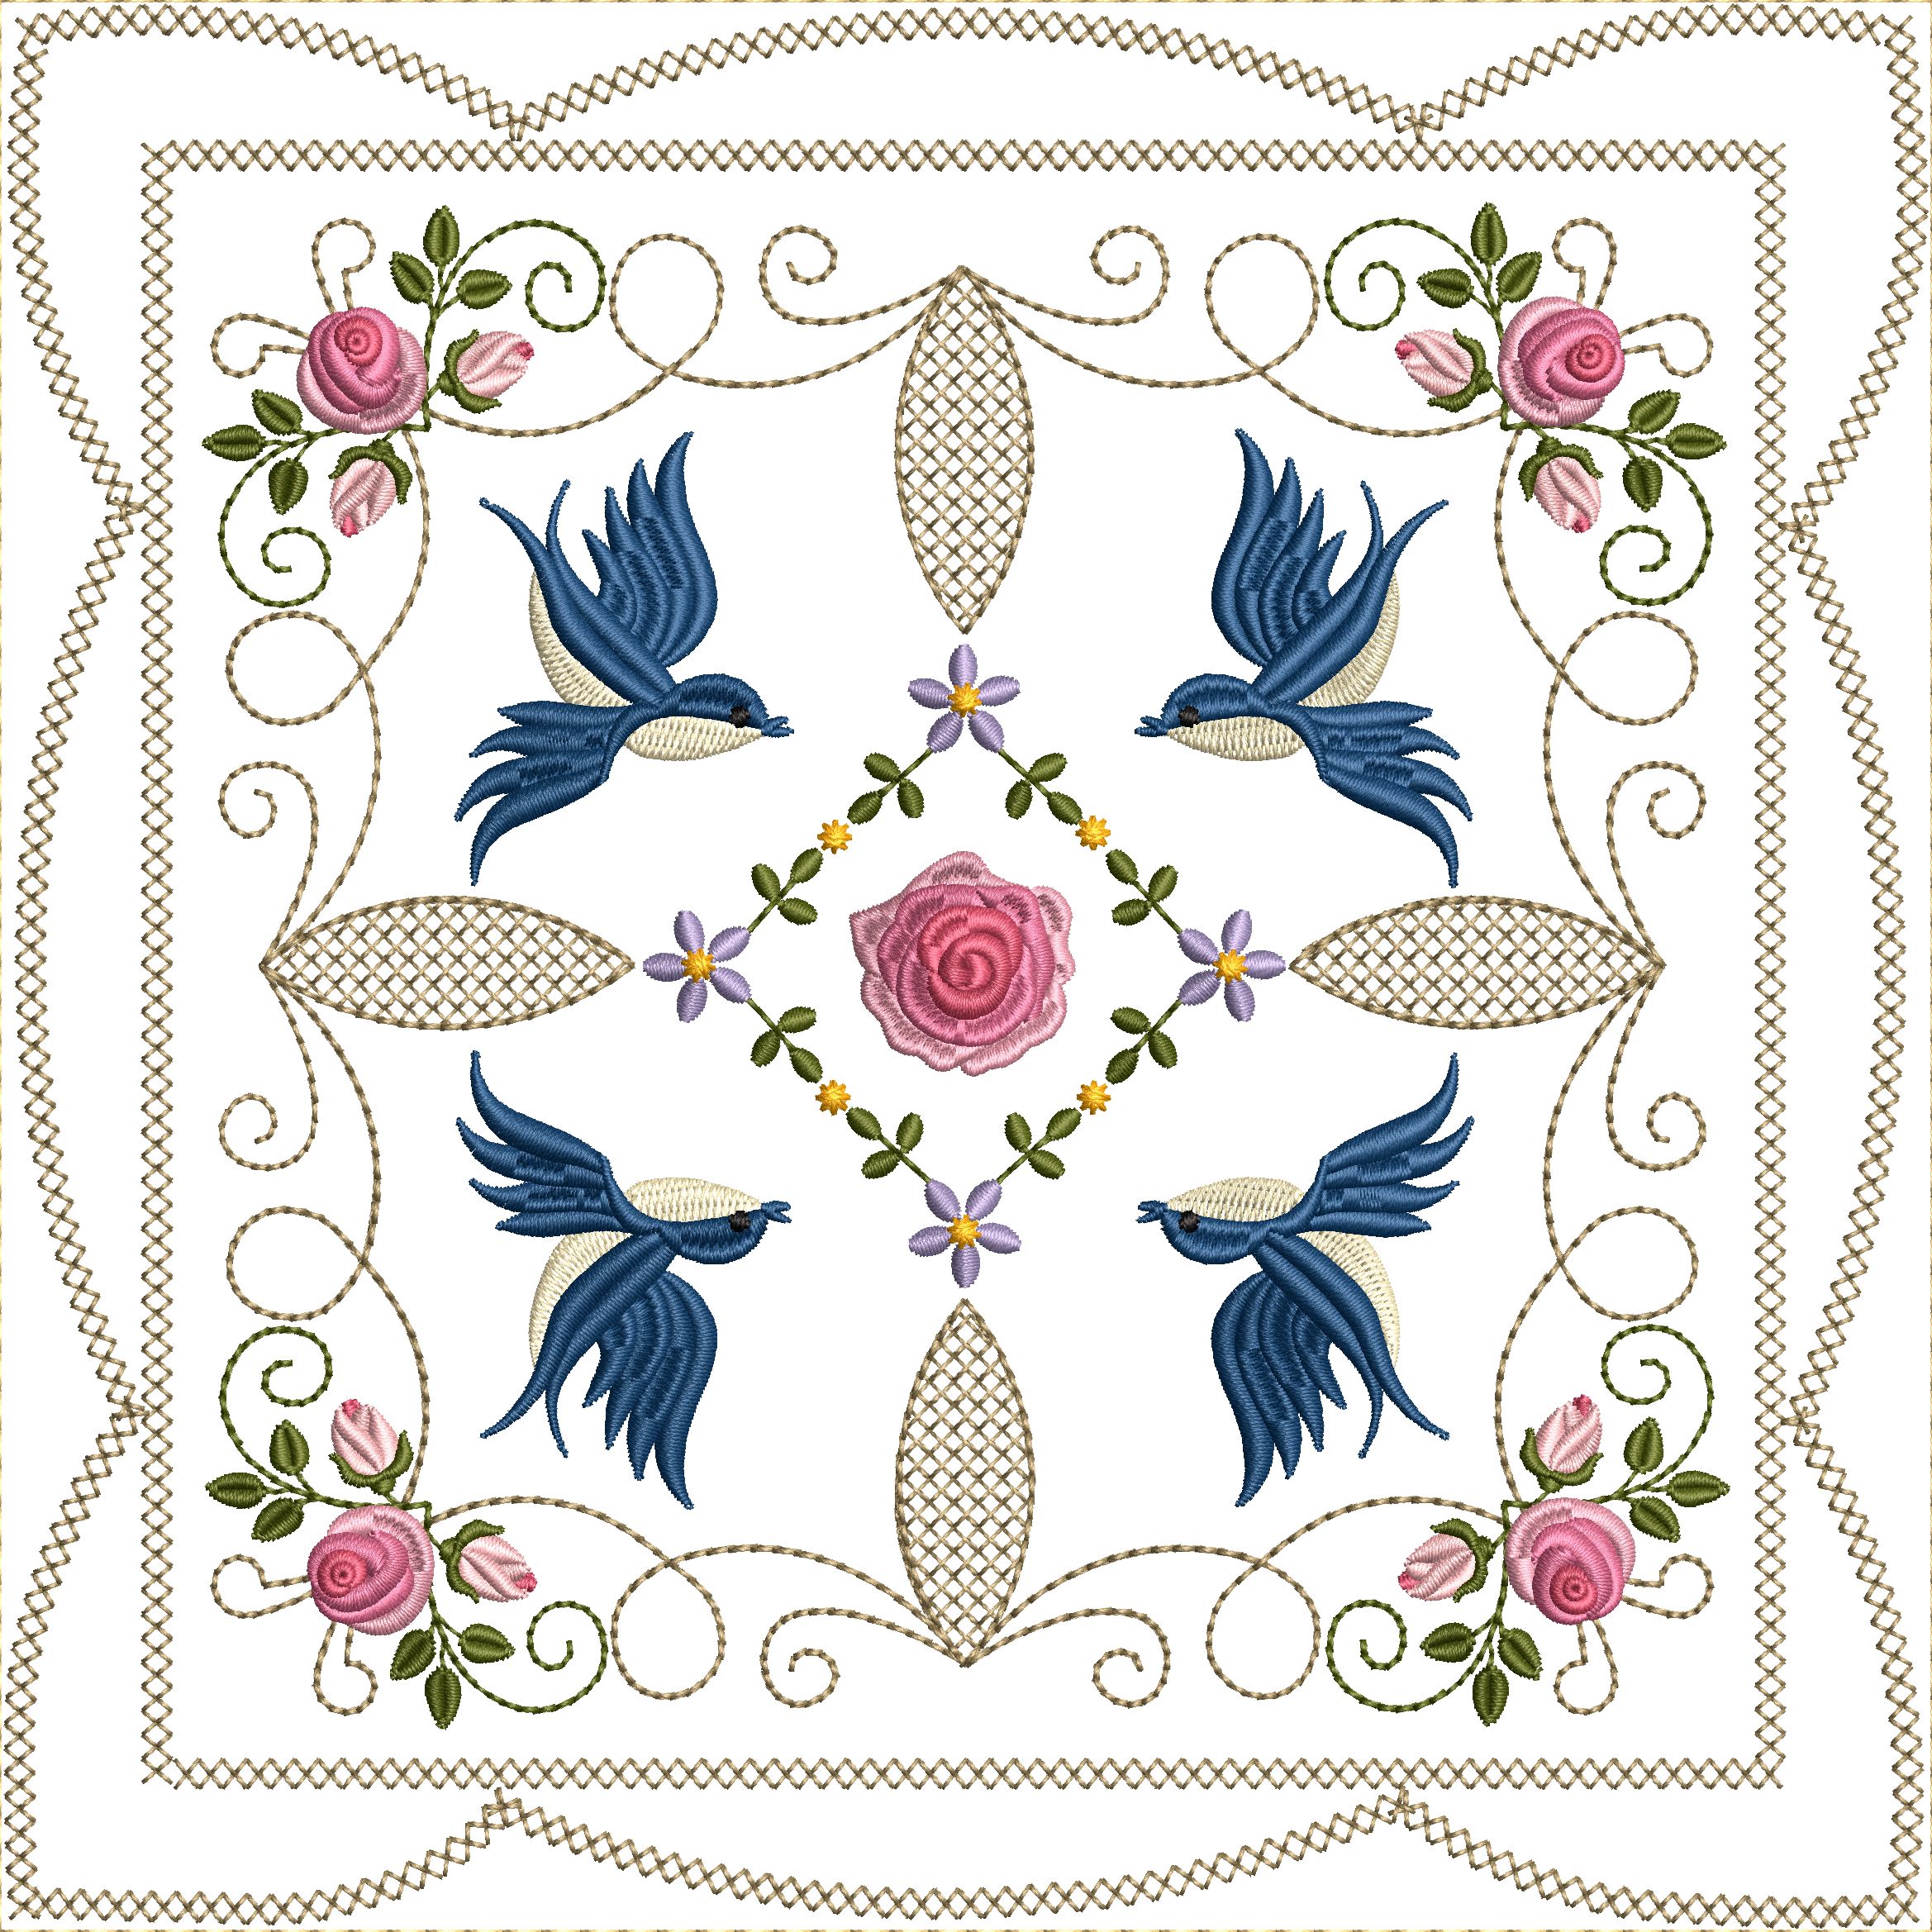 Bluebirds and Roses Quilt Blocks 8x8-10